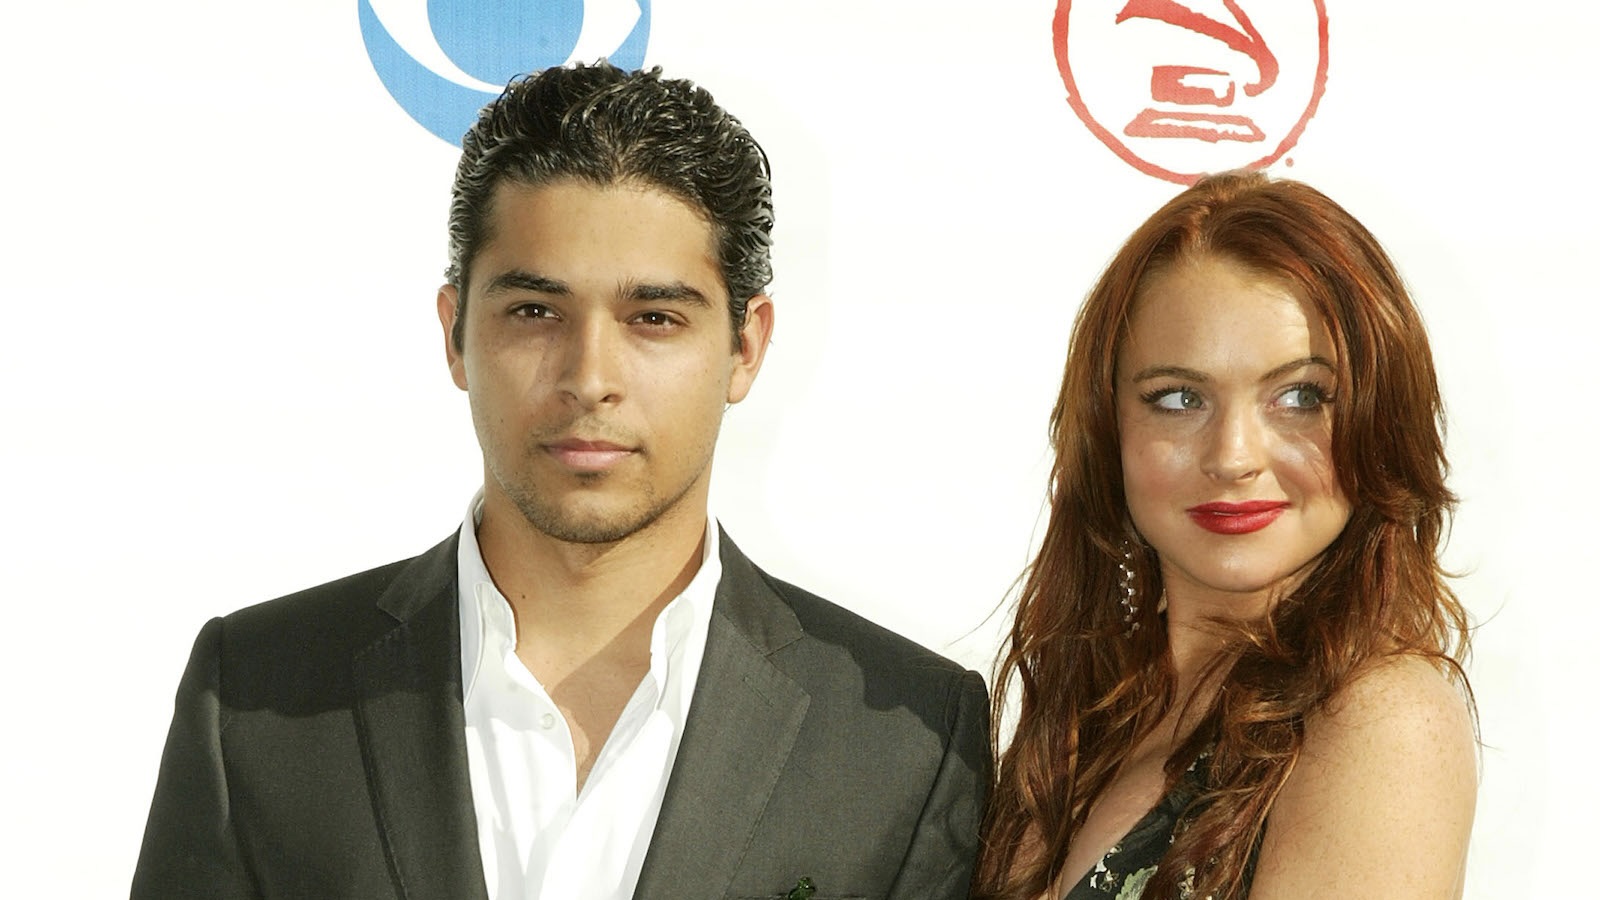 LOS ANGELES - SEPTEMBER 1:  Actor Wilmer Valderrama and actress Lindsay Lohan attends the "5th Annual Latin Grammy Awards" held at the Shrine Auditorium on September 1, 2004 in Los Angeles, California.  